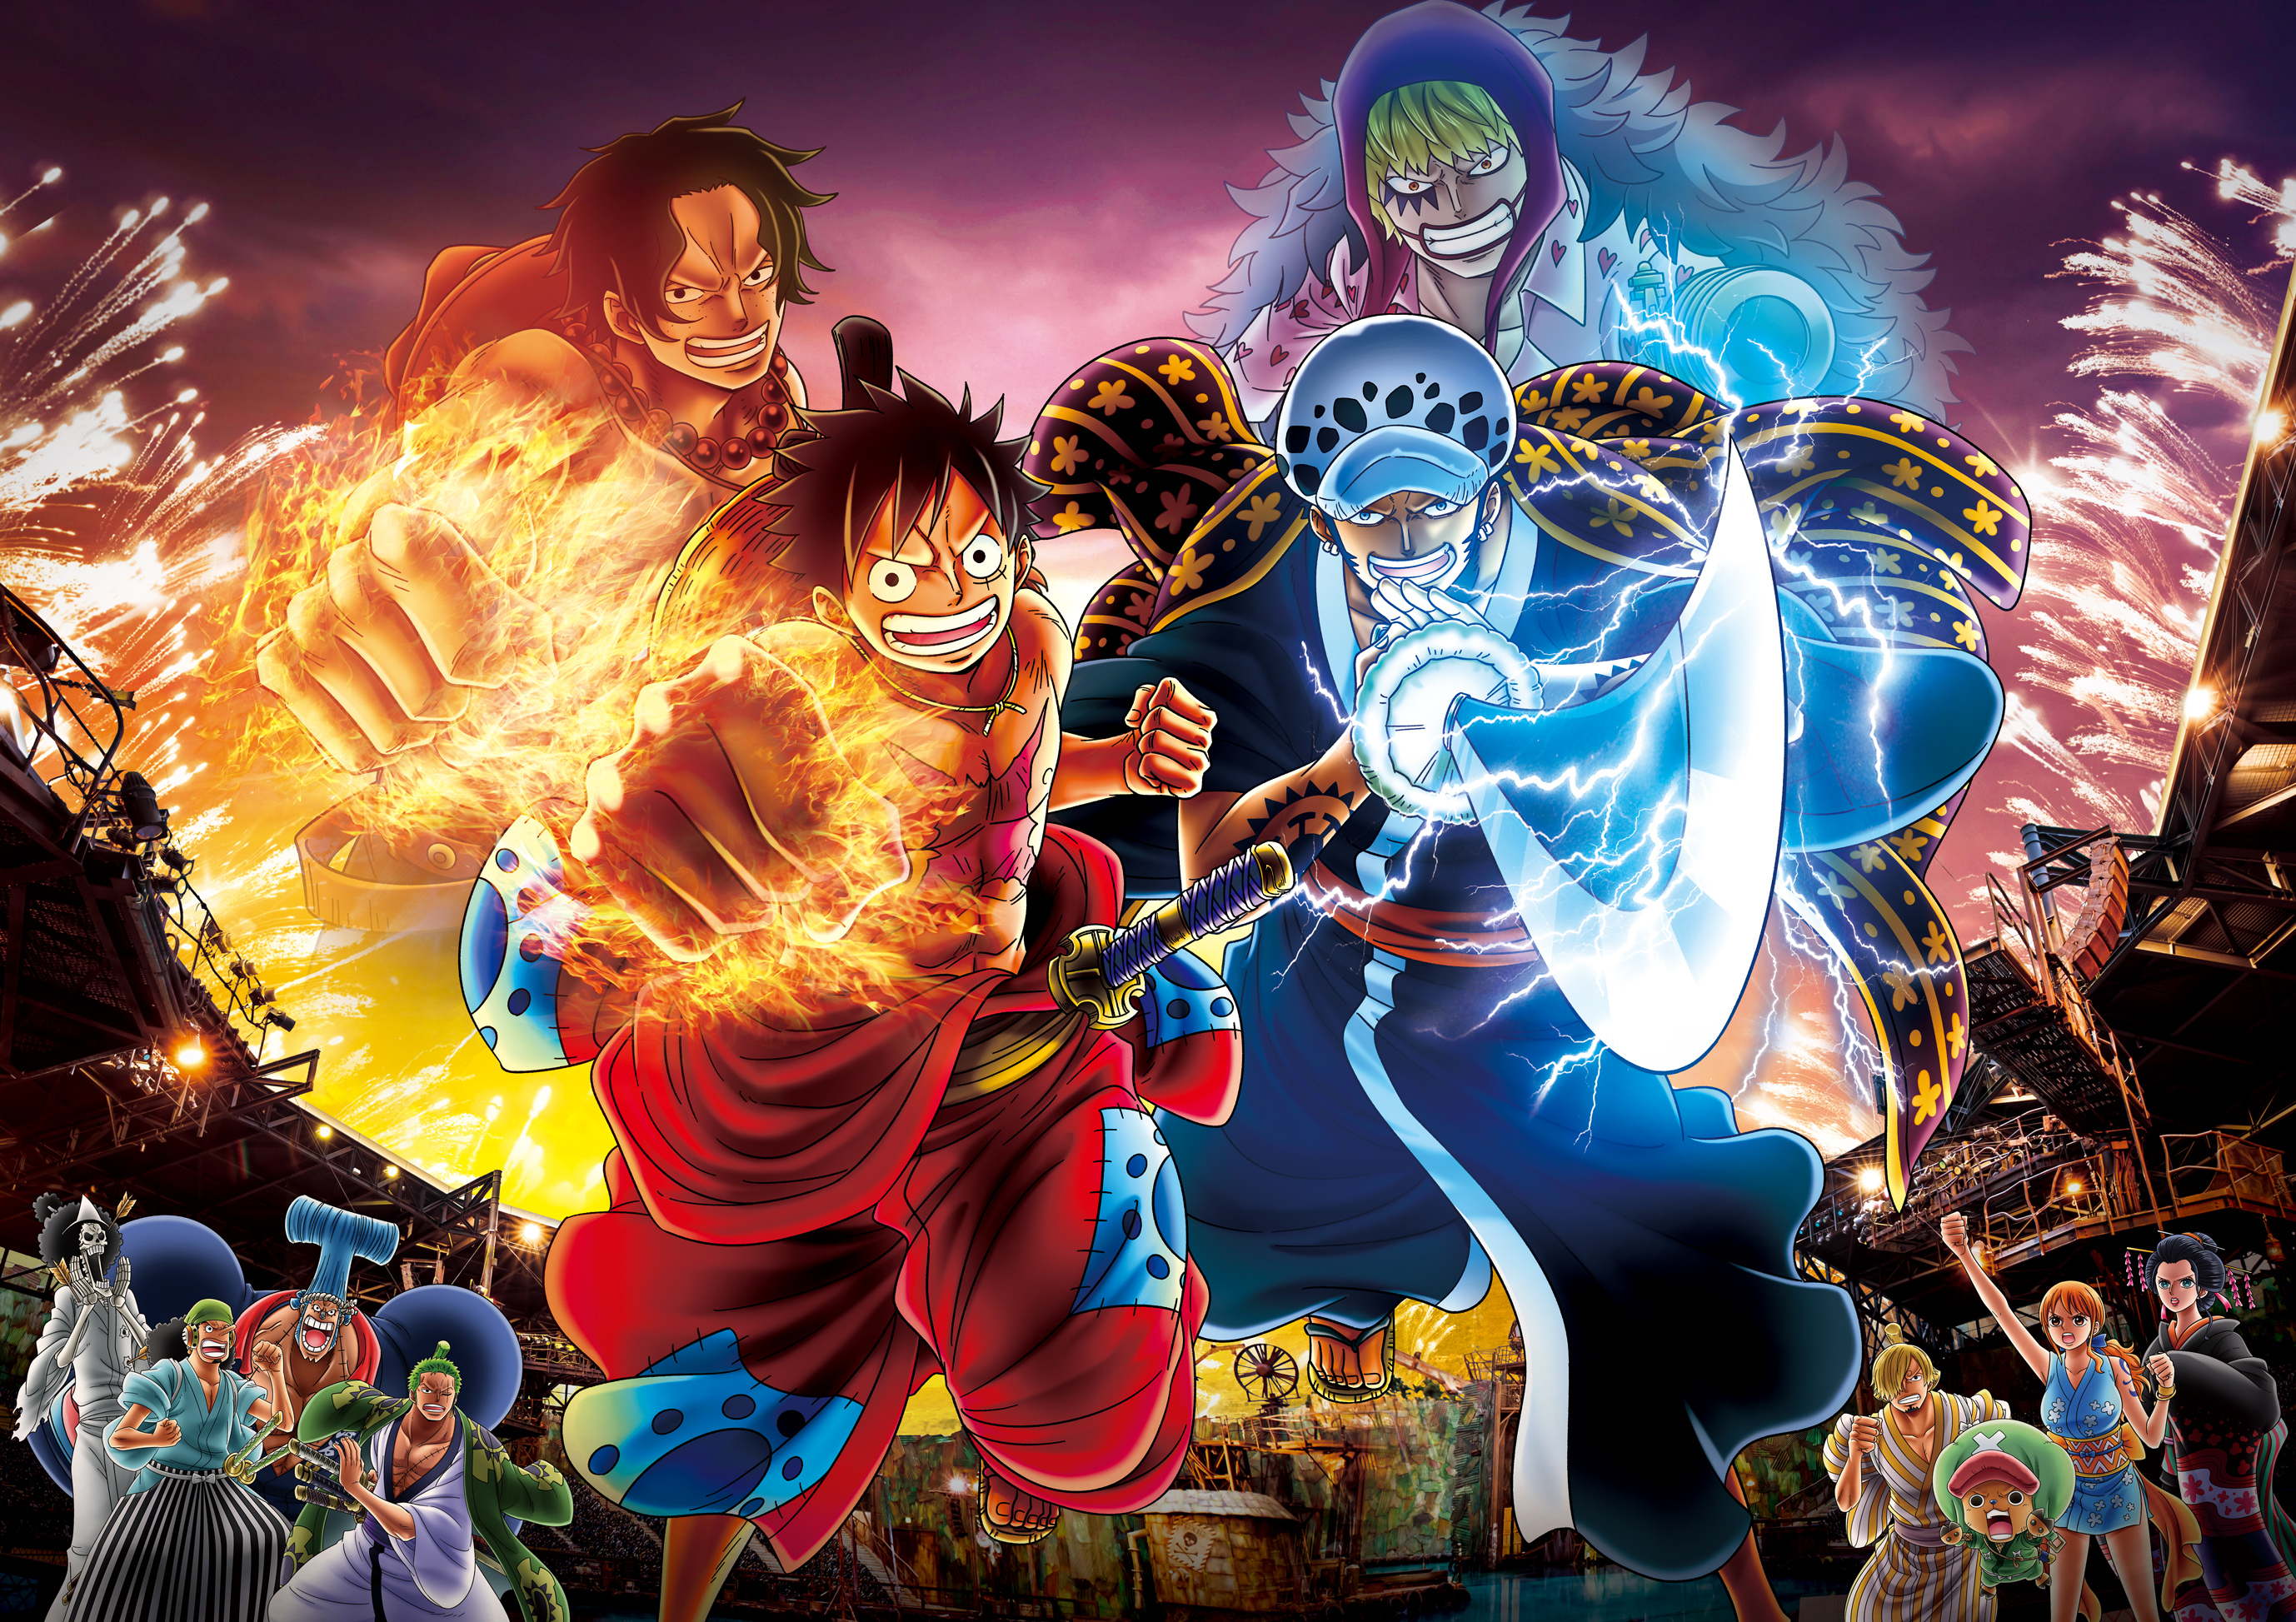 12 One Piece HD Wallpapers in Iphone XS MAX, 12x12 Resolution